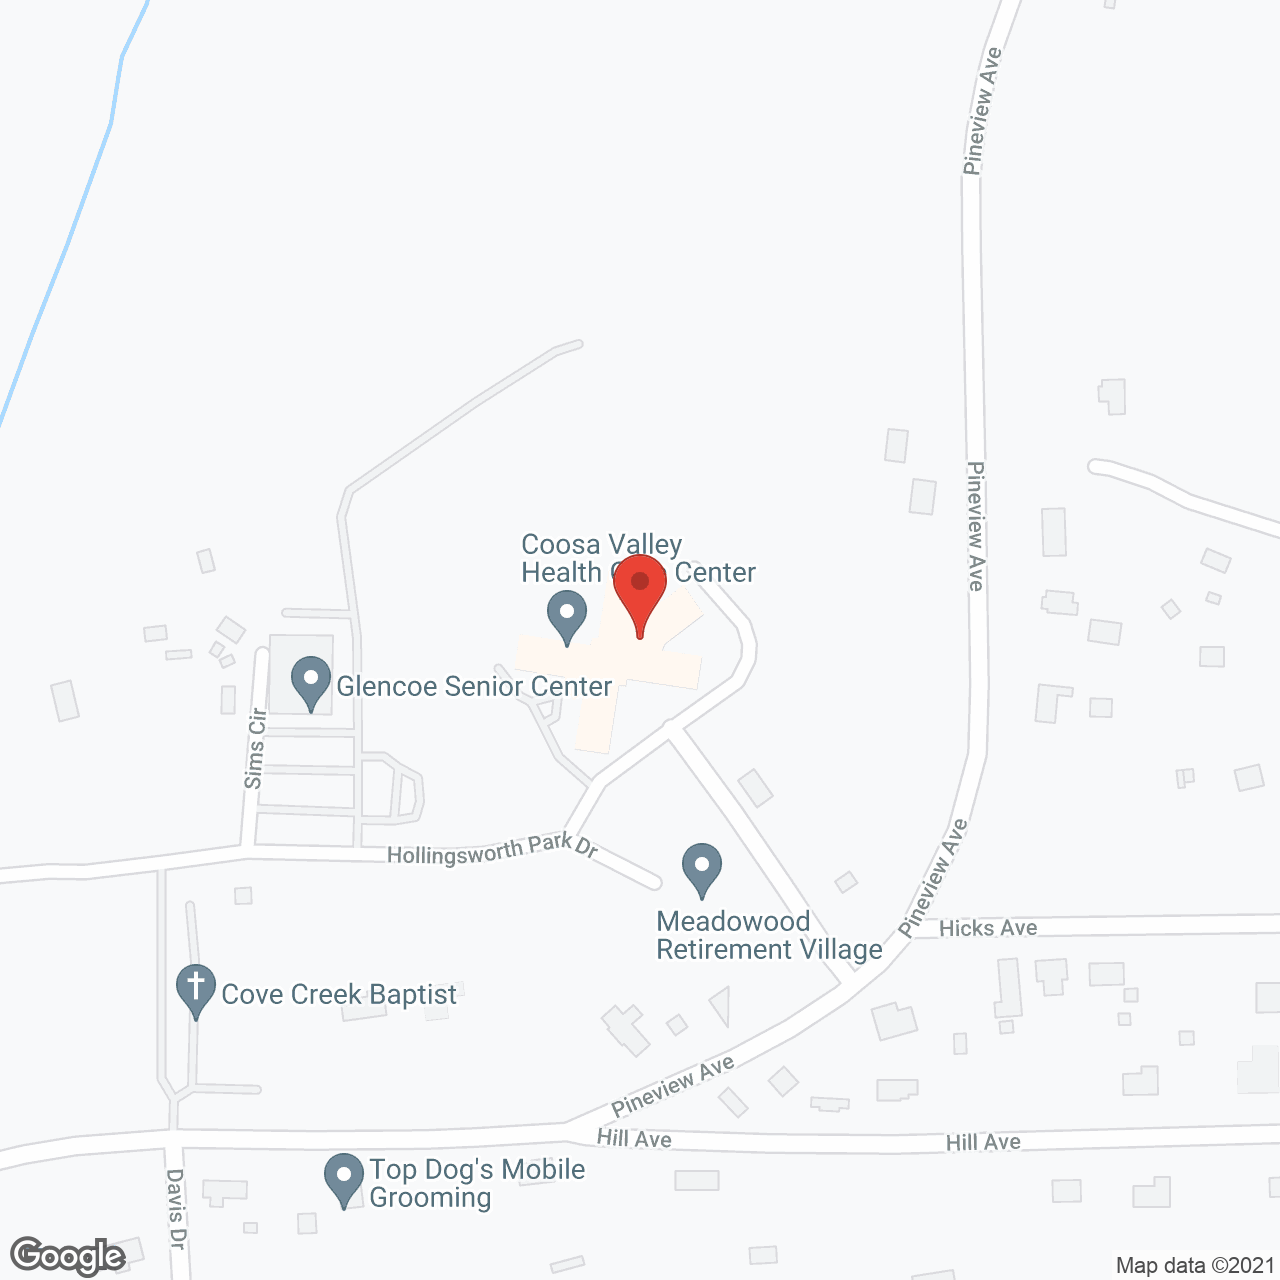 Coosa Valley Health Care Ctr in google map